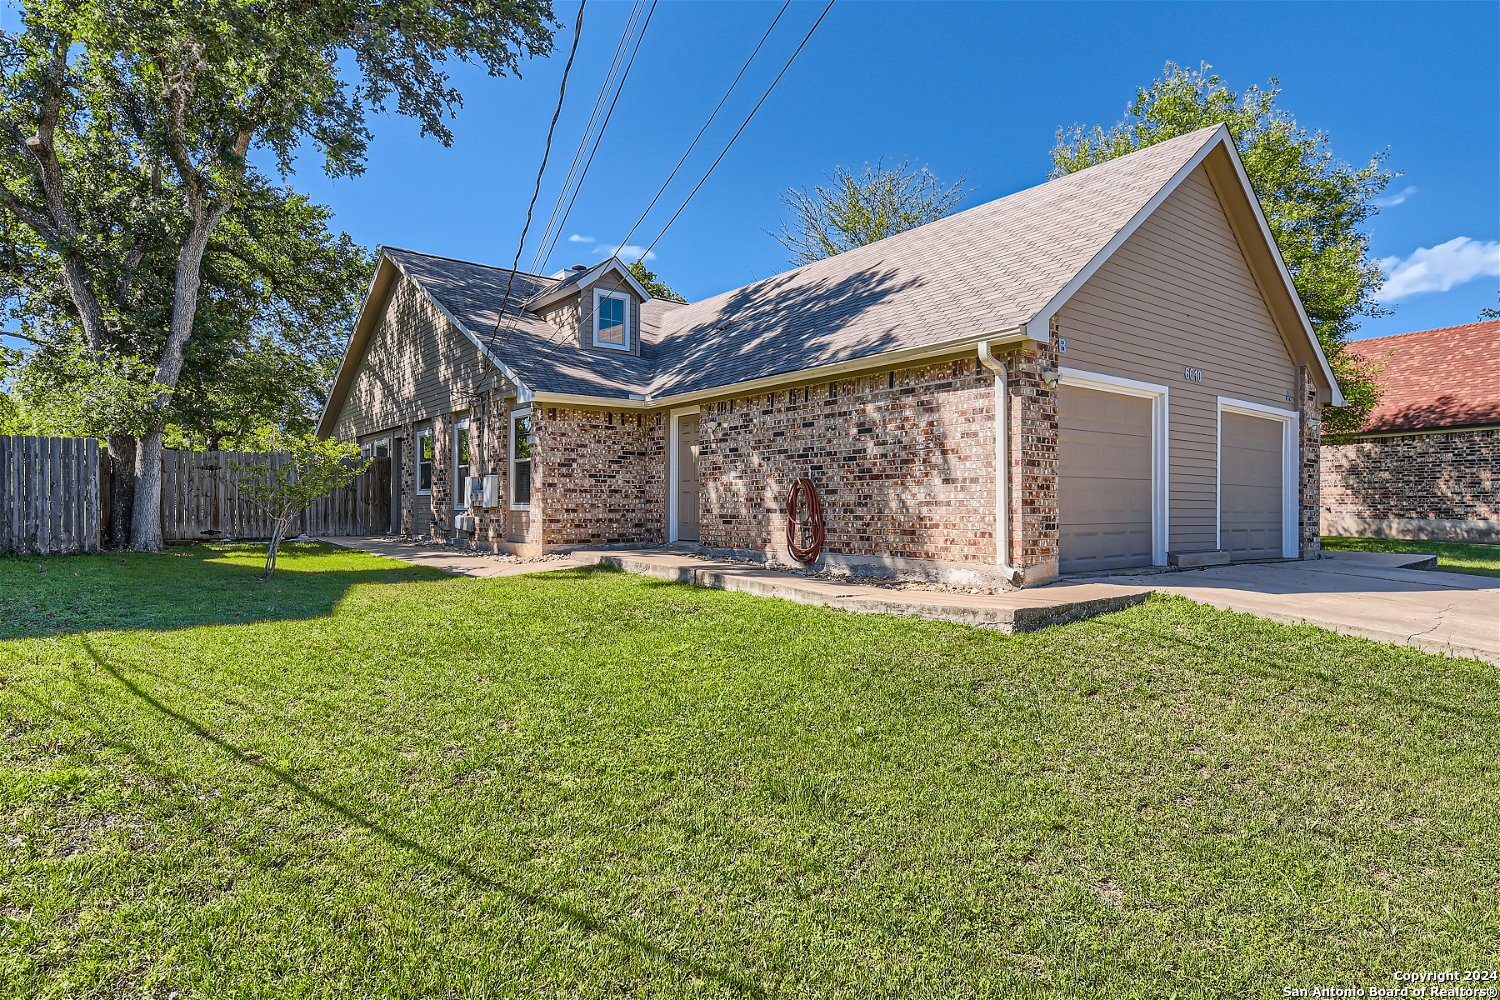 Photo of 6010 Parkwood Dr in Austin, TX